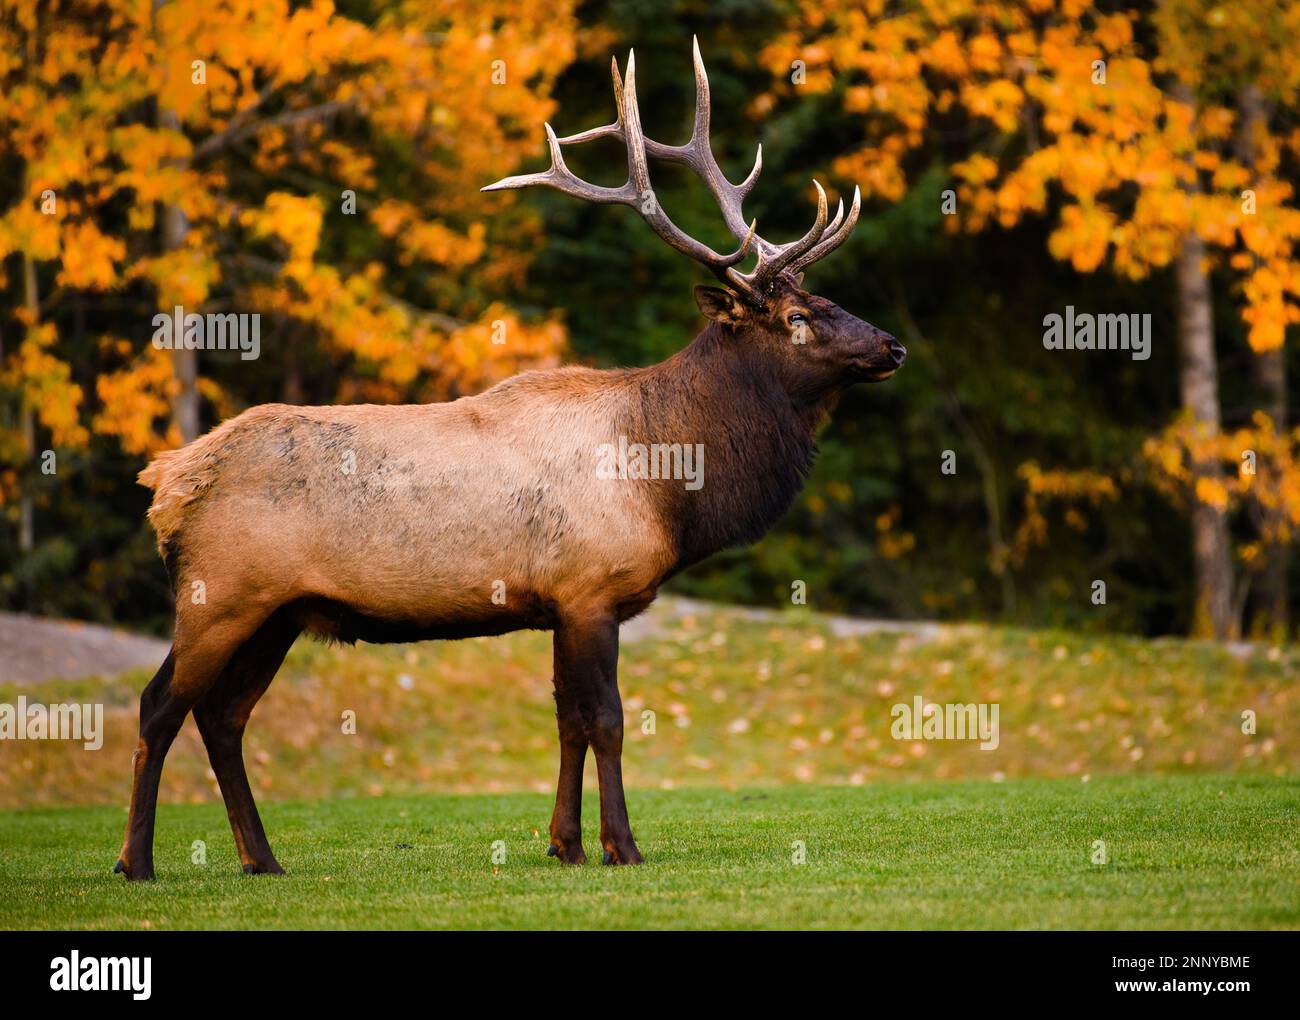 Bull elk (Cervus canadensis) in front of autumn colored trees, Canmore, Alberta, Canada Stock Photo